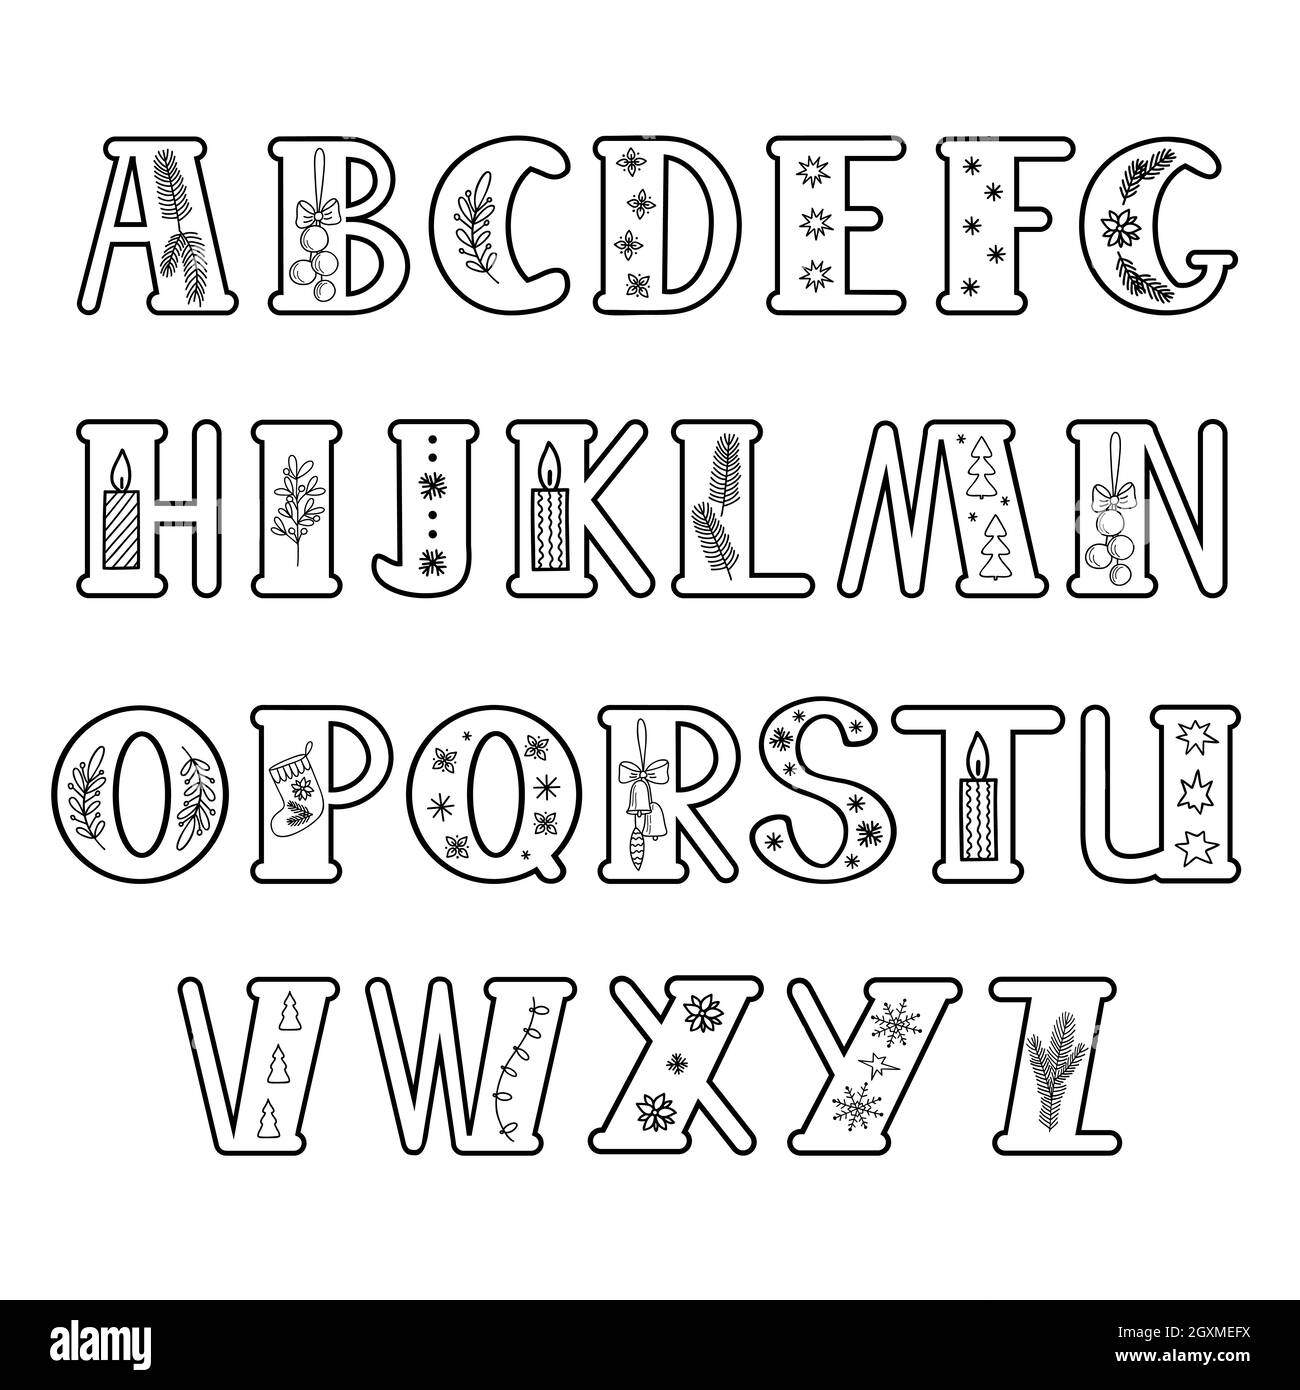 Capital hand drawn black letters of English alphabet decorated for ...